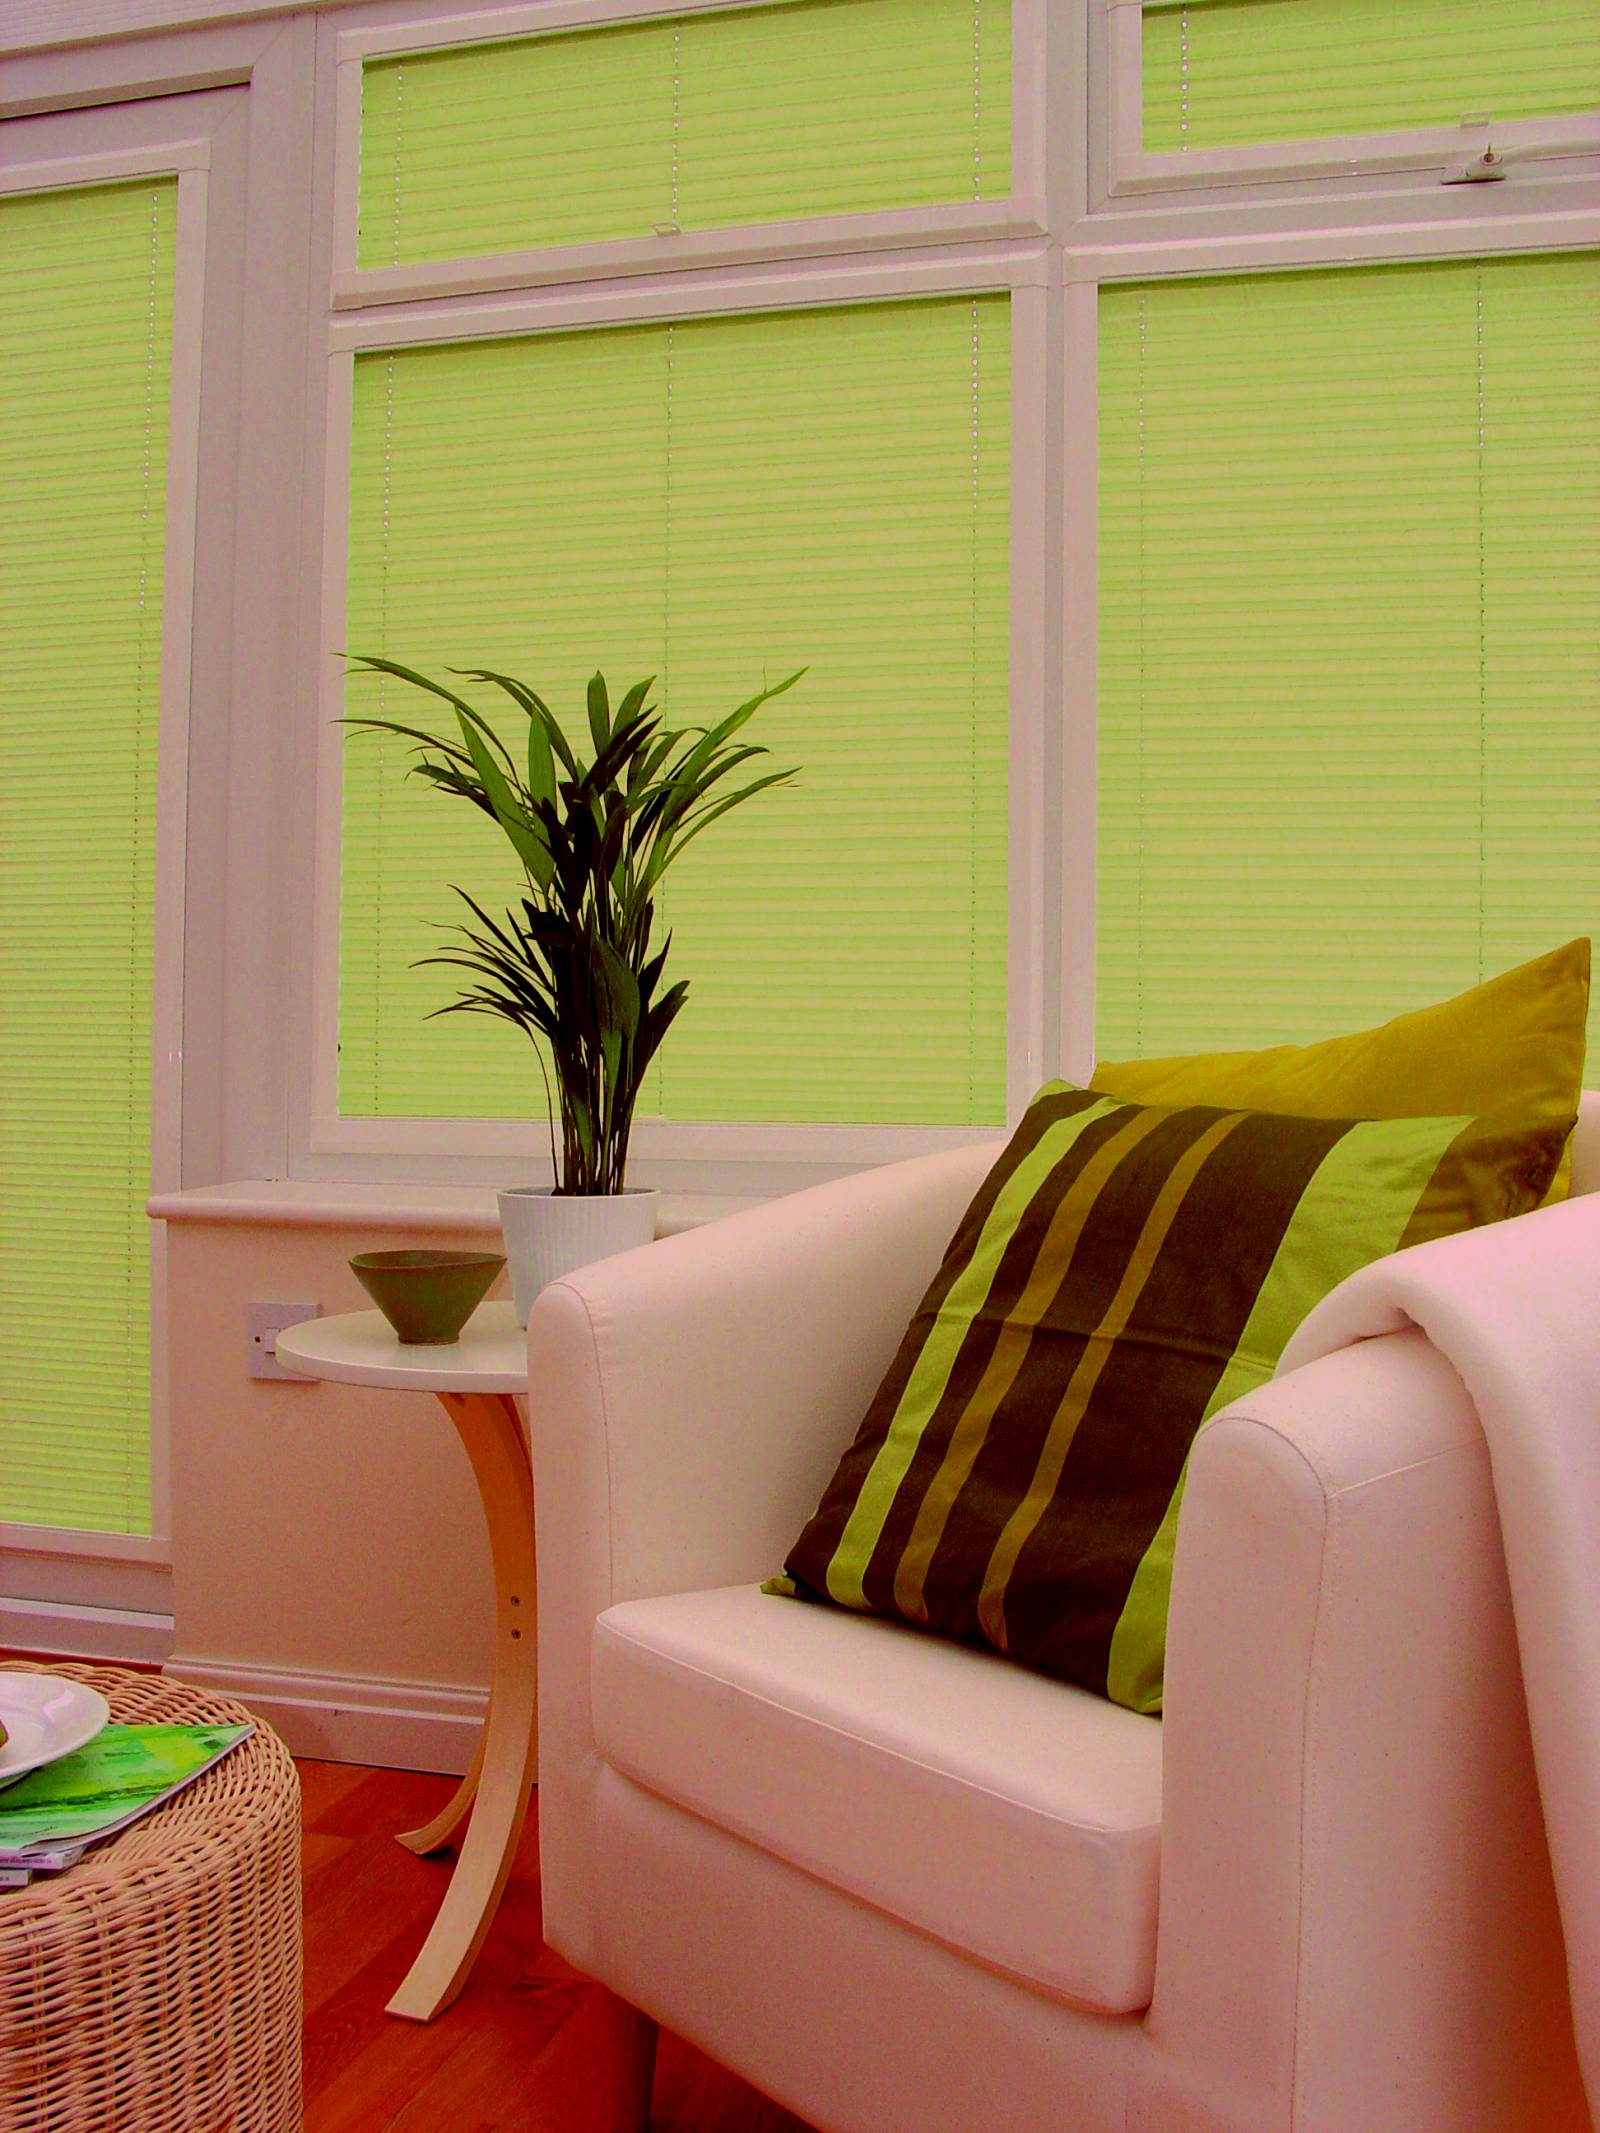 How To Lime Green Venetian Blinds May Make Your Room Bright (17 Useful Ideas)